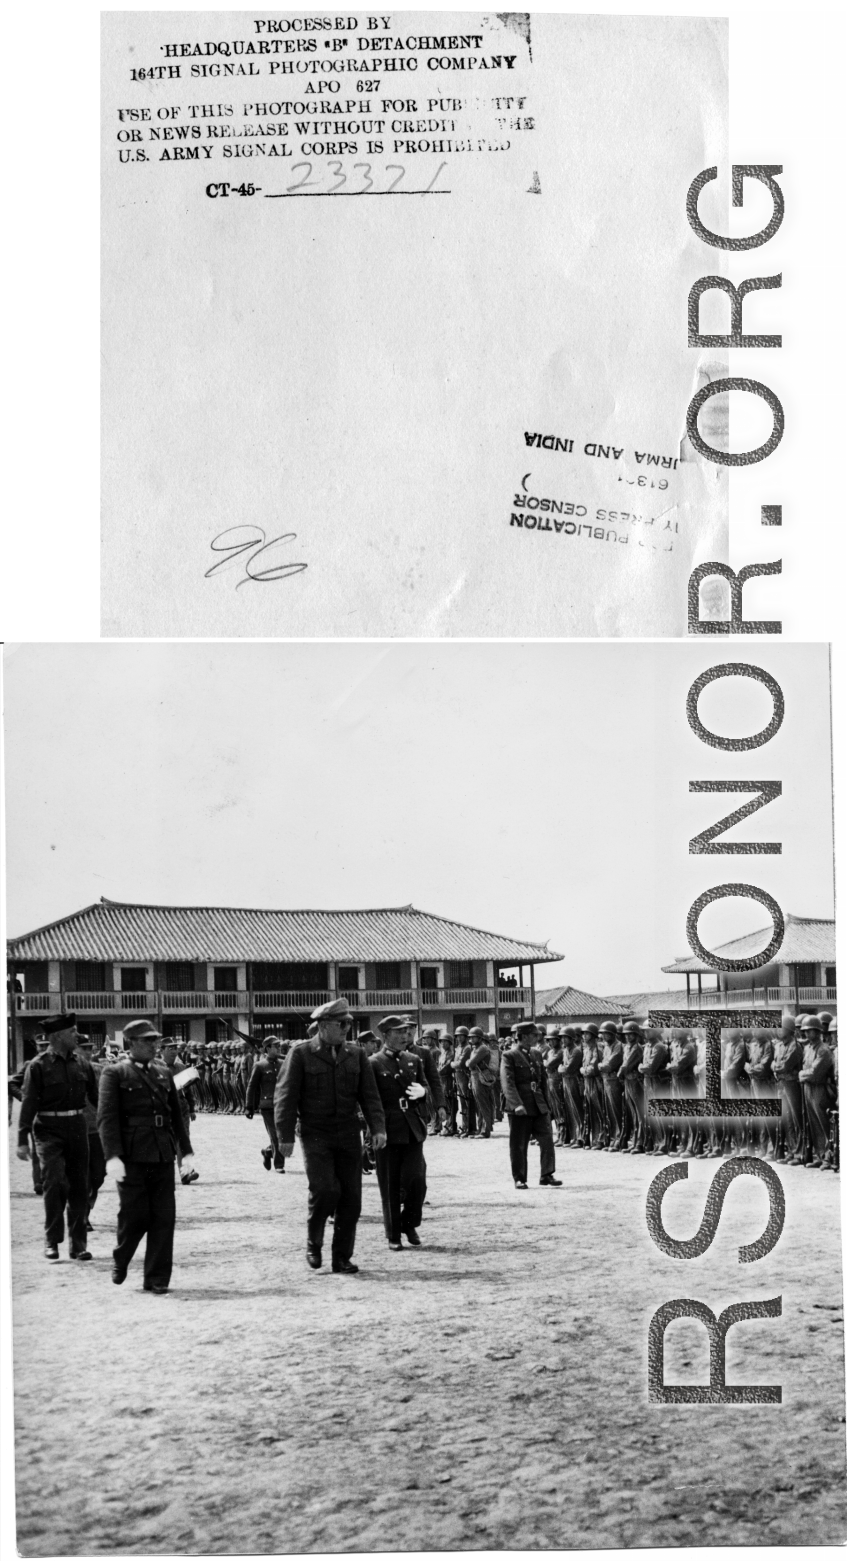 US and Chinese officers review Chinese troops in SW China during WWII.  164th Signal Photographic Company photo.